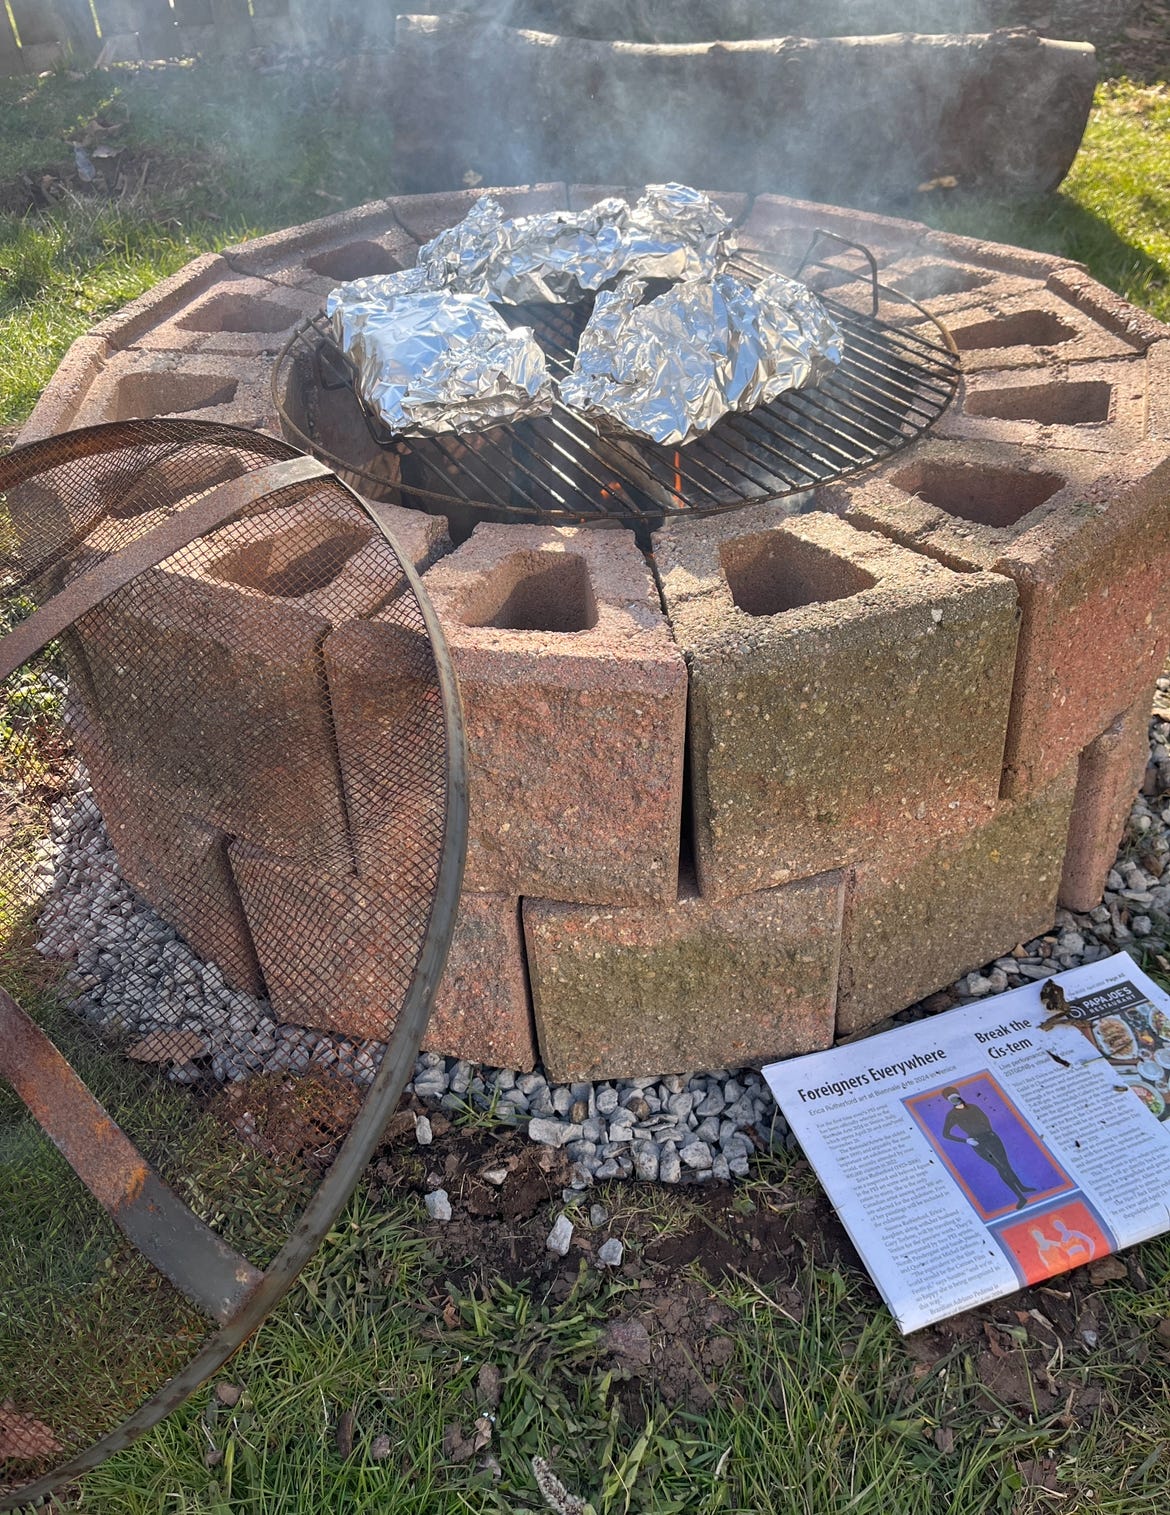 A brick fire pit coveredd in a barbeque grate with packages wrapped in foil roasting on top